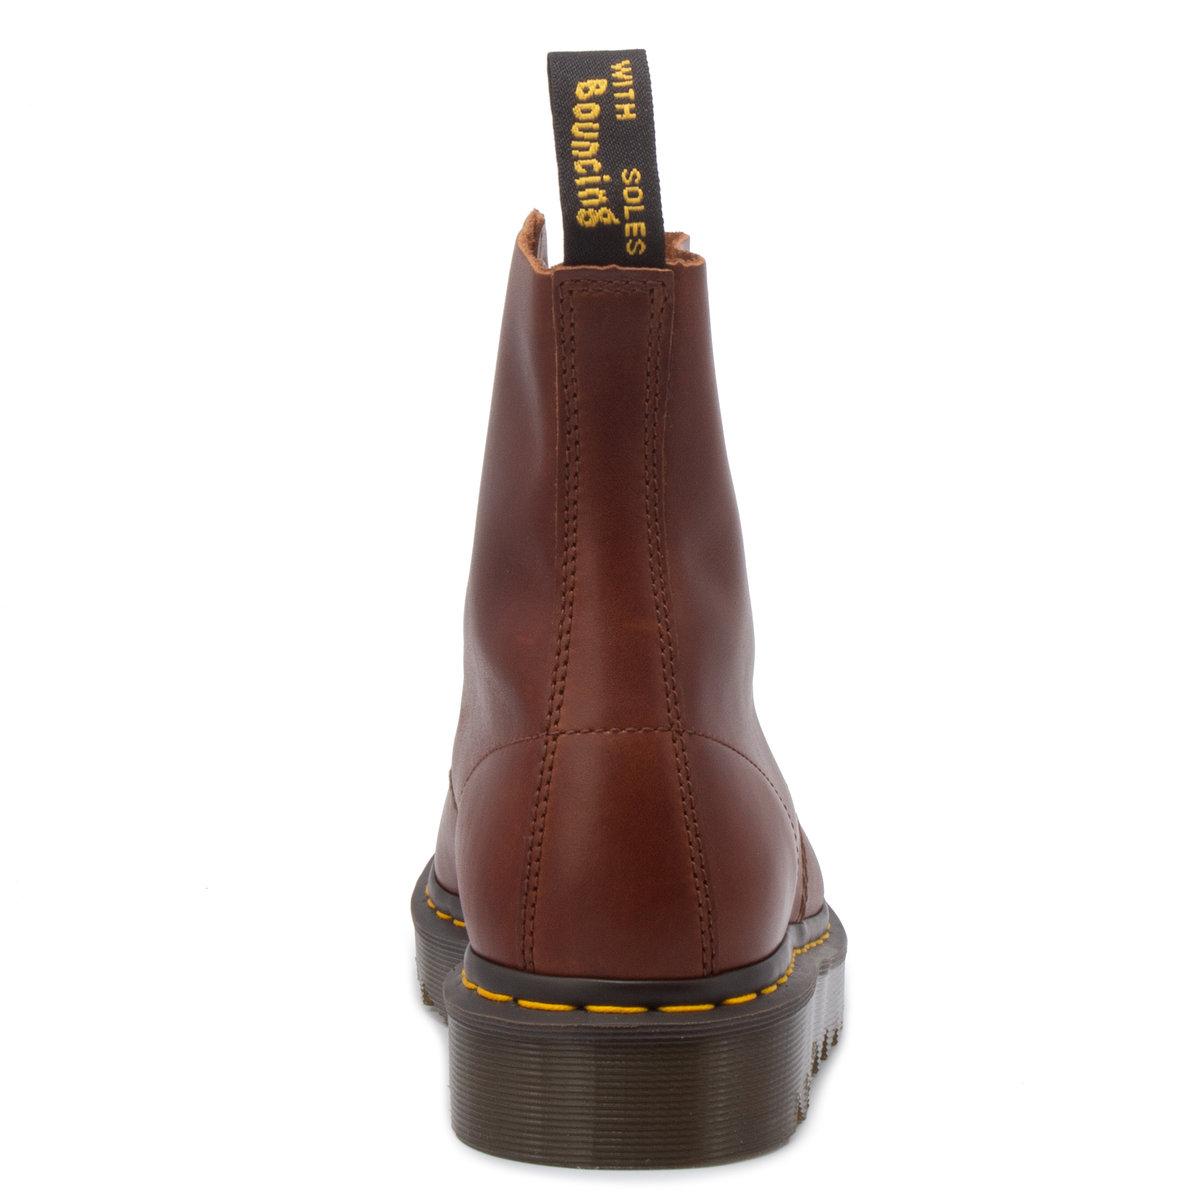 Dr. Martens 1460 Ambassador Soft Leather Pascal 8-eye Boots in Tan (Brown)  for Men - Save 49% | Lyst